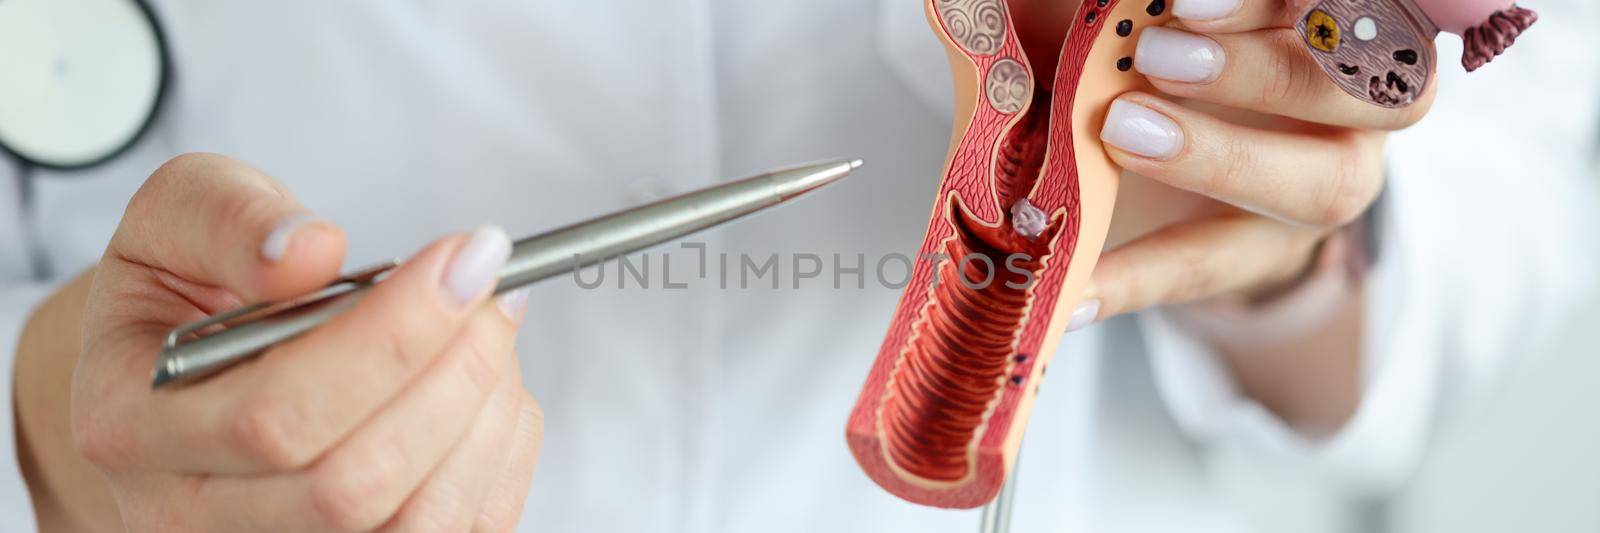 Doctor gynecologist showing pen on plastic model of uterus and ovaries closeup by kuprevich